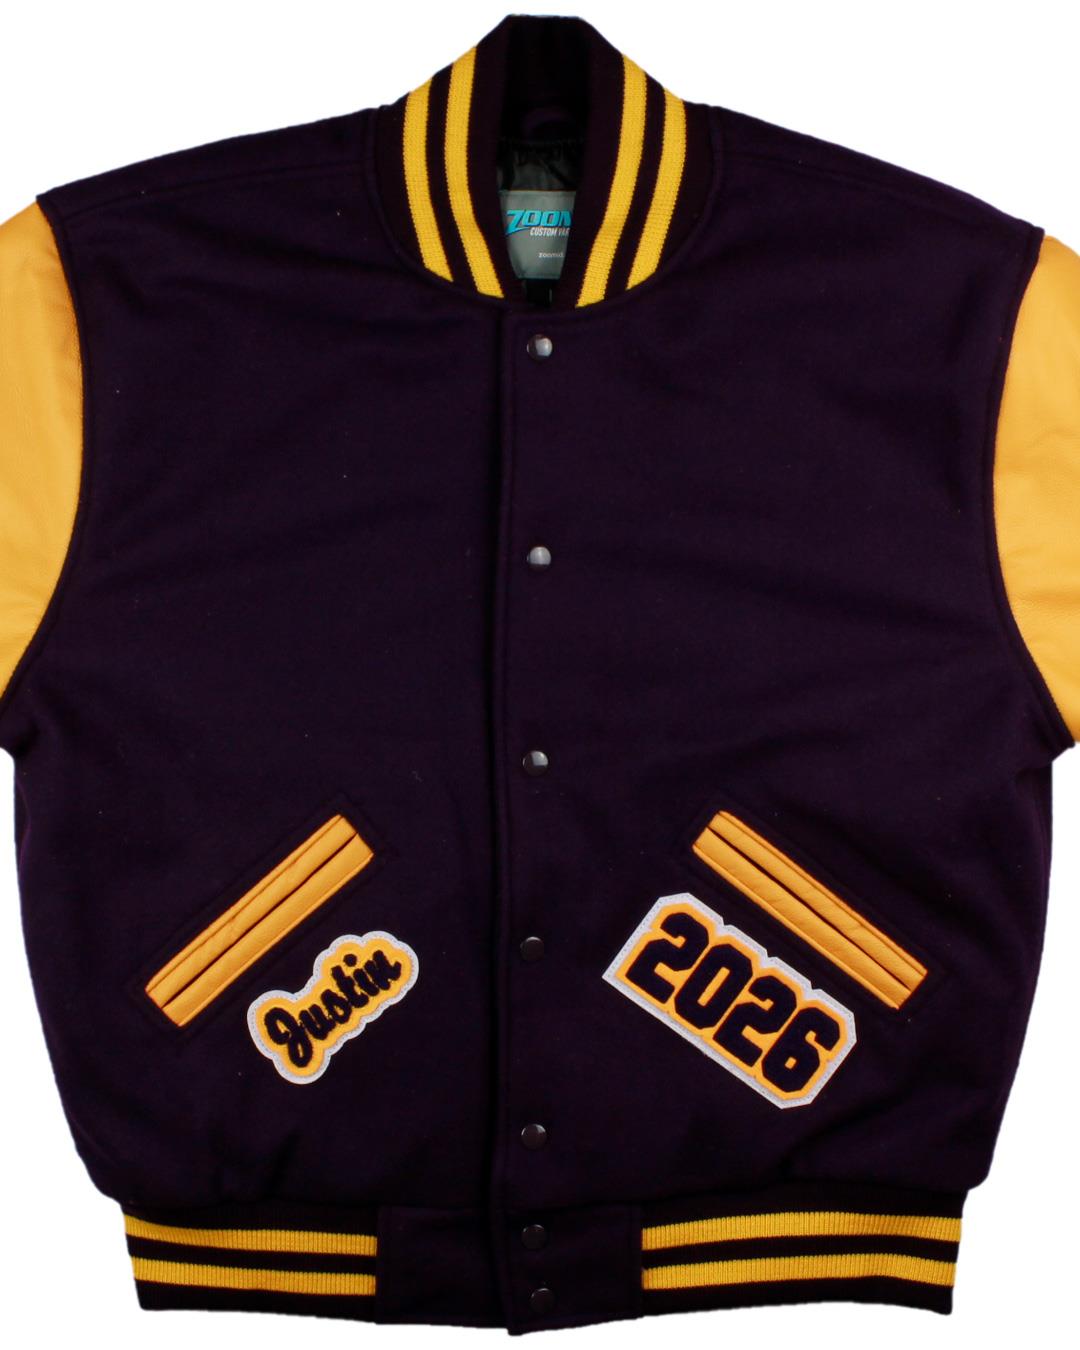 Cotopaxi High School Varsity Jacket, Cotopaxi, CO - Front